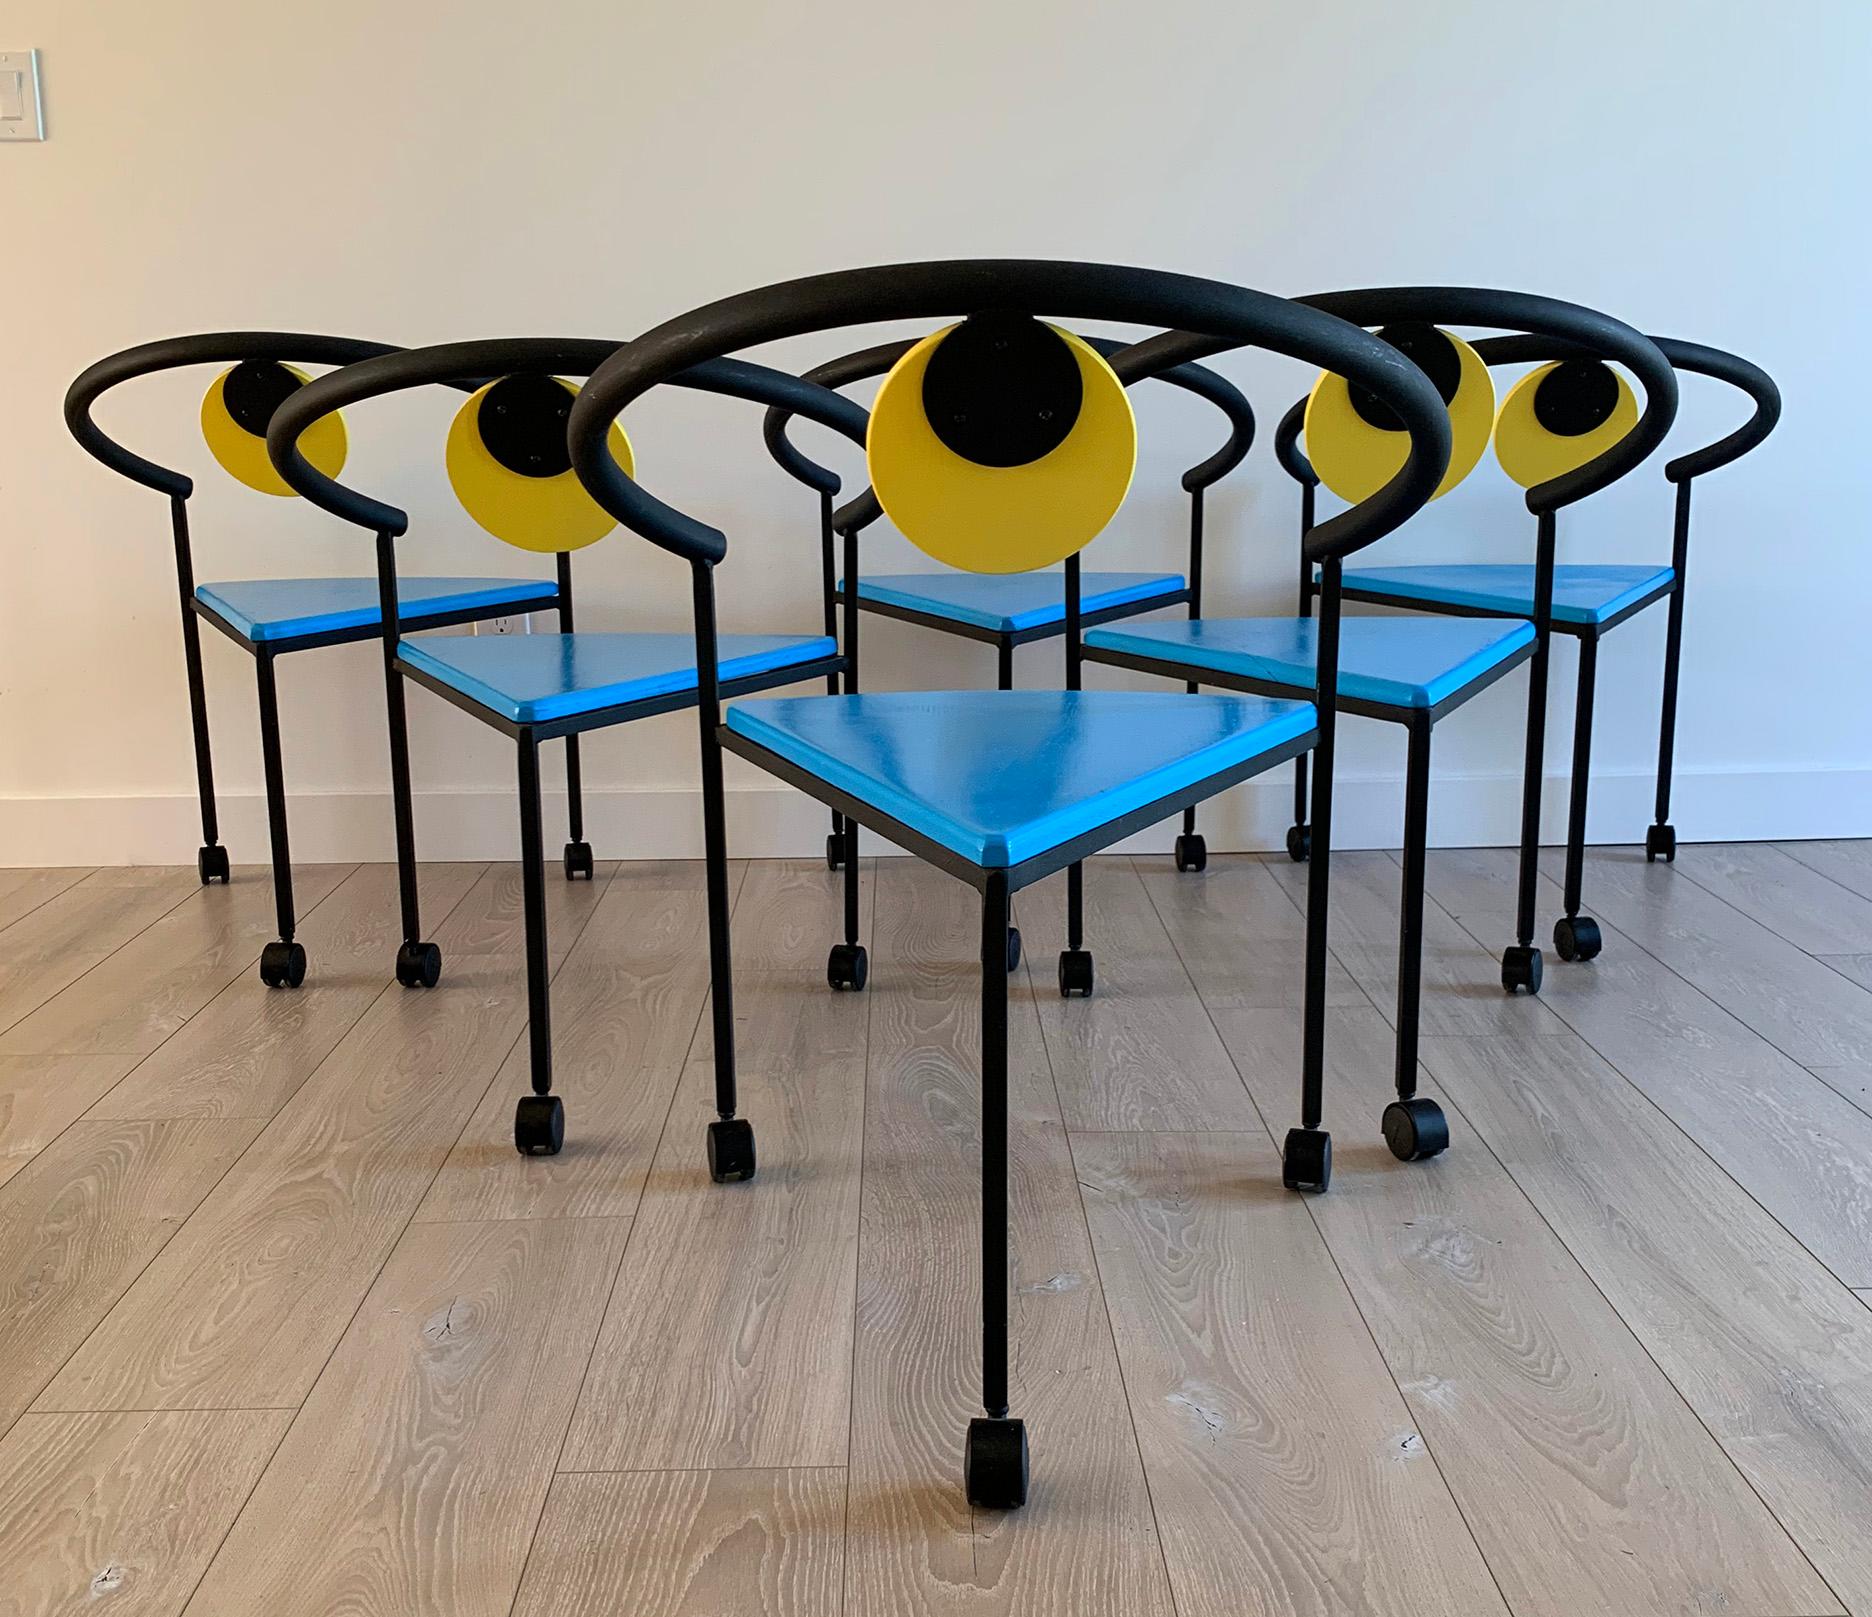 An eye-popping gorgeous set of 6 Memphis Milano style dining chairs from the 1990s! These vintage chairs are in great condition and really give off that fun Postmodern vibe from the 1990s. Very Michele De Lucci, Ettore Sottsass, or Peter Shire in